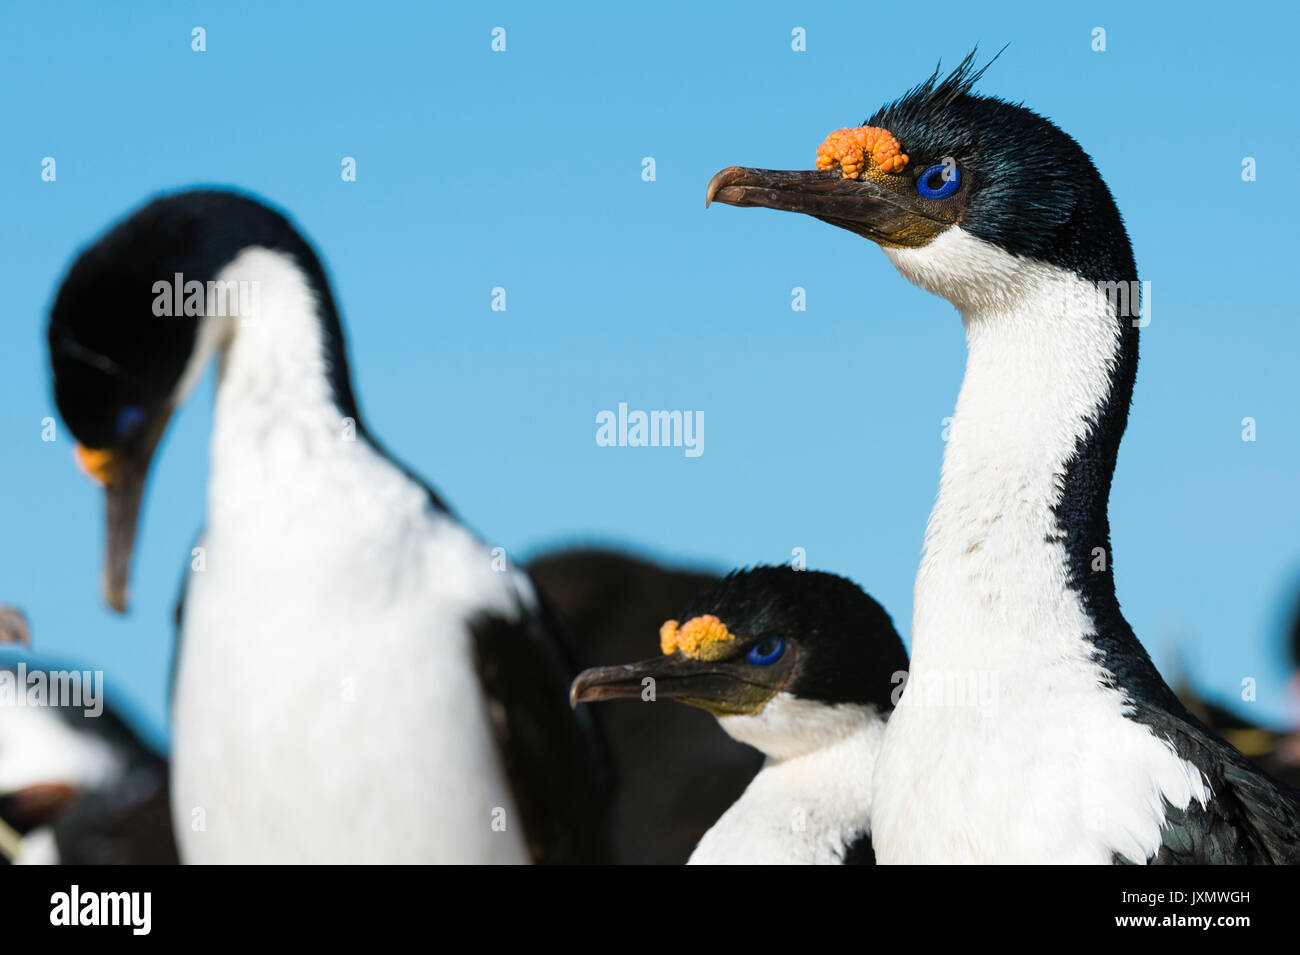 Portrait of an Imperial shag (Leucocarbo atriceps), Port Stanley, Falkland Islands, South America Stock Photo